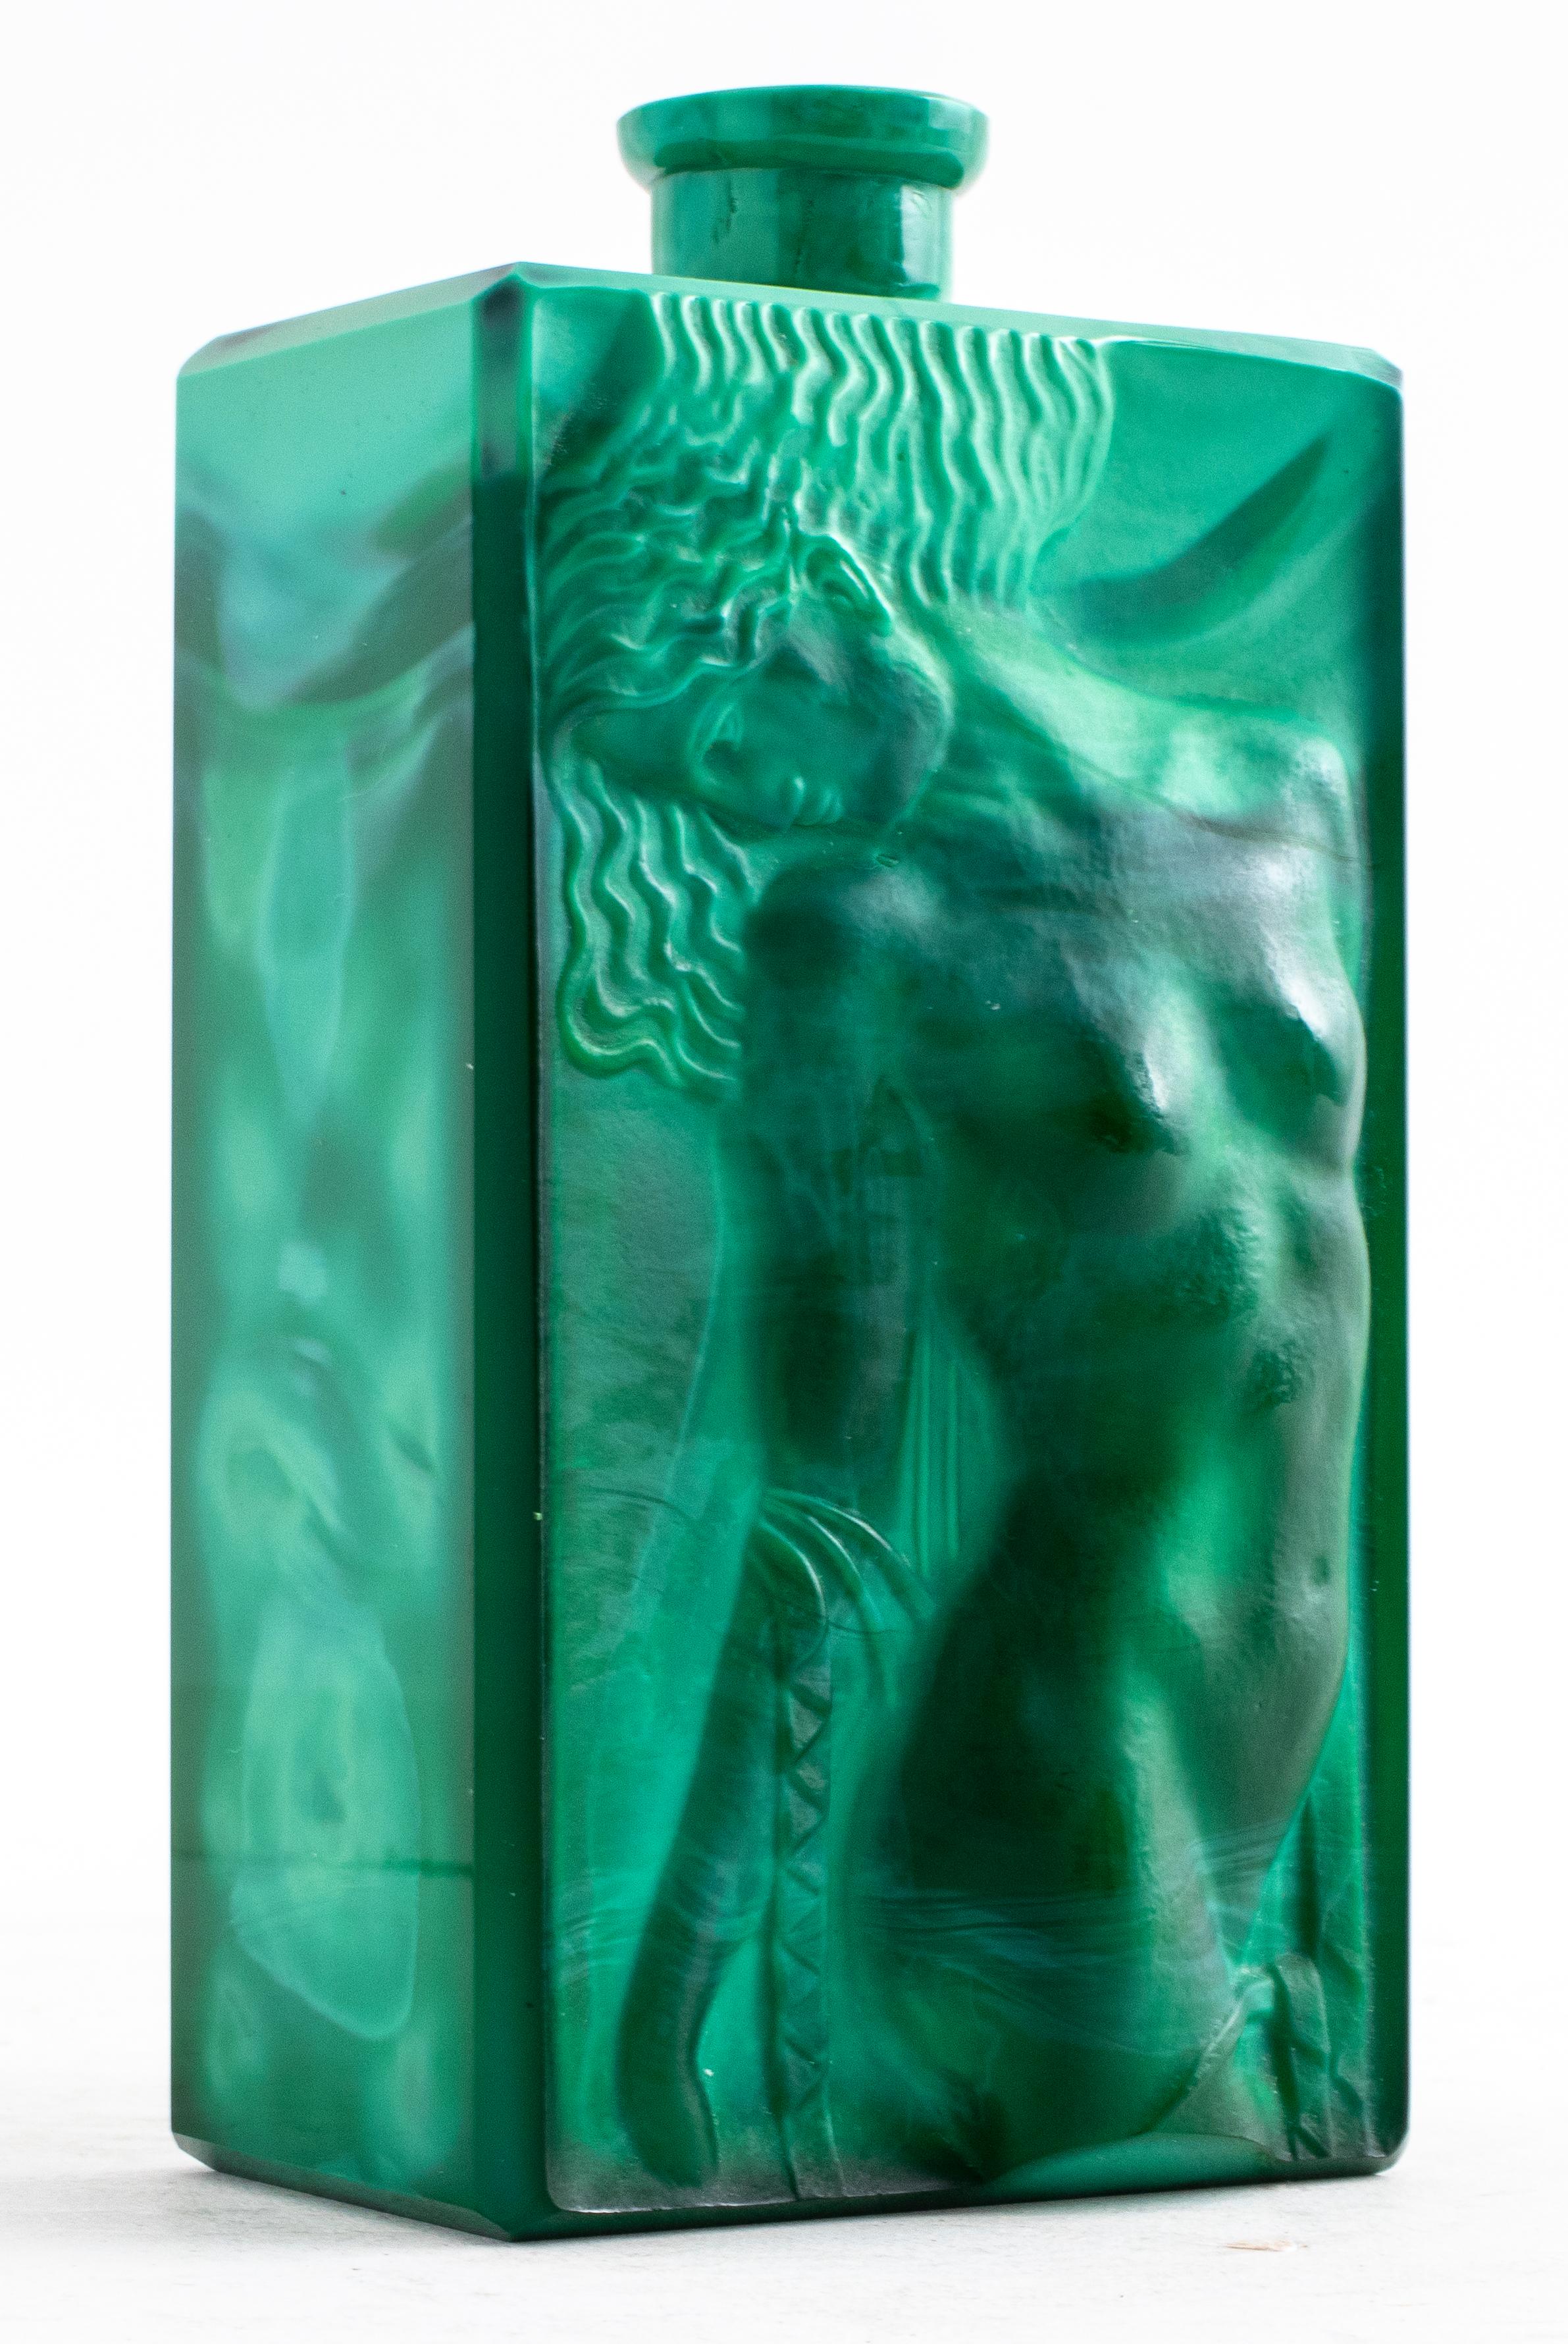 Faux malachite drinking vessel with a relief of a female nude on the front side. 

Dimensions: 1.75